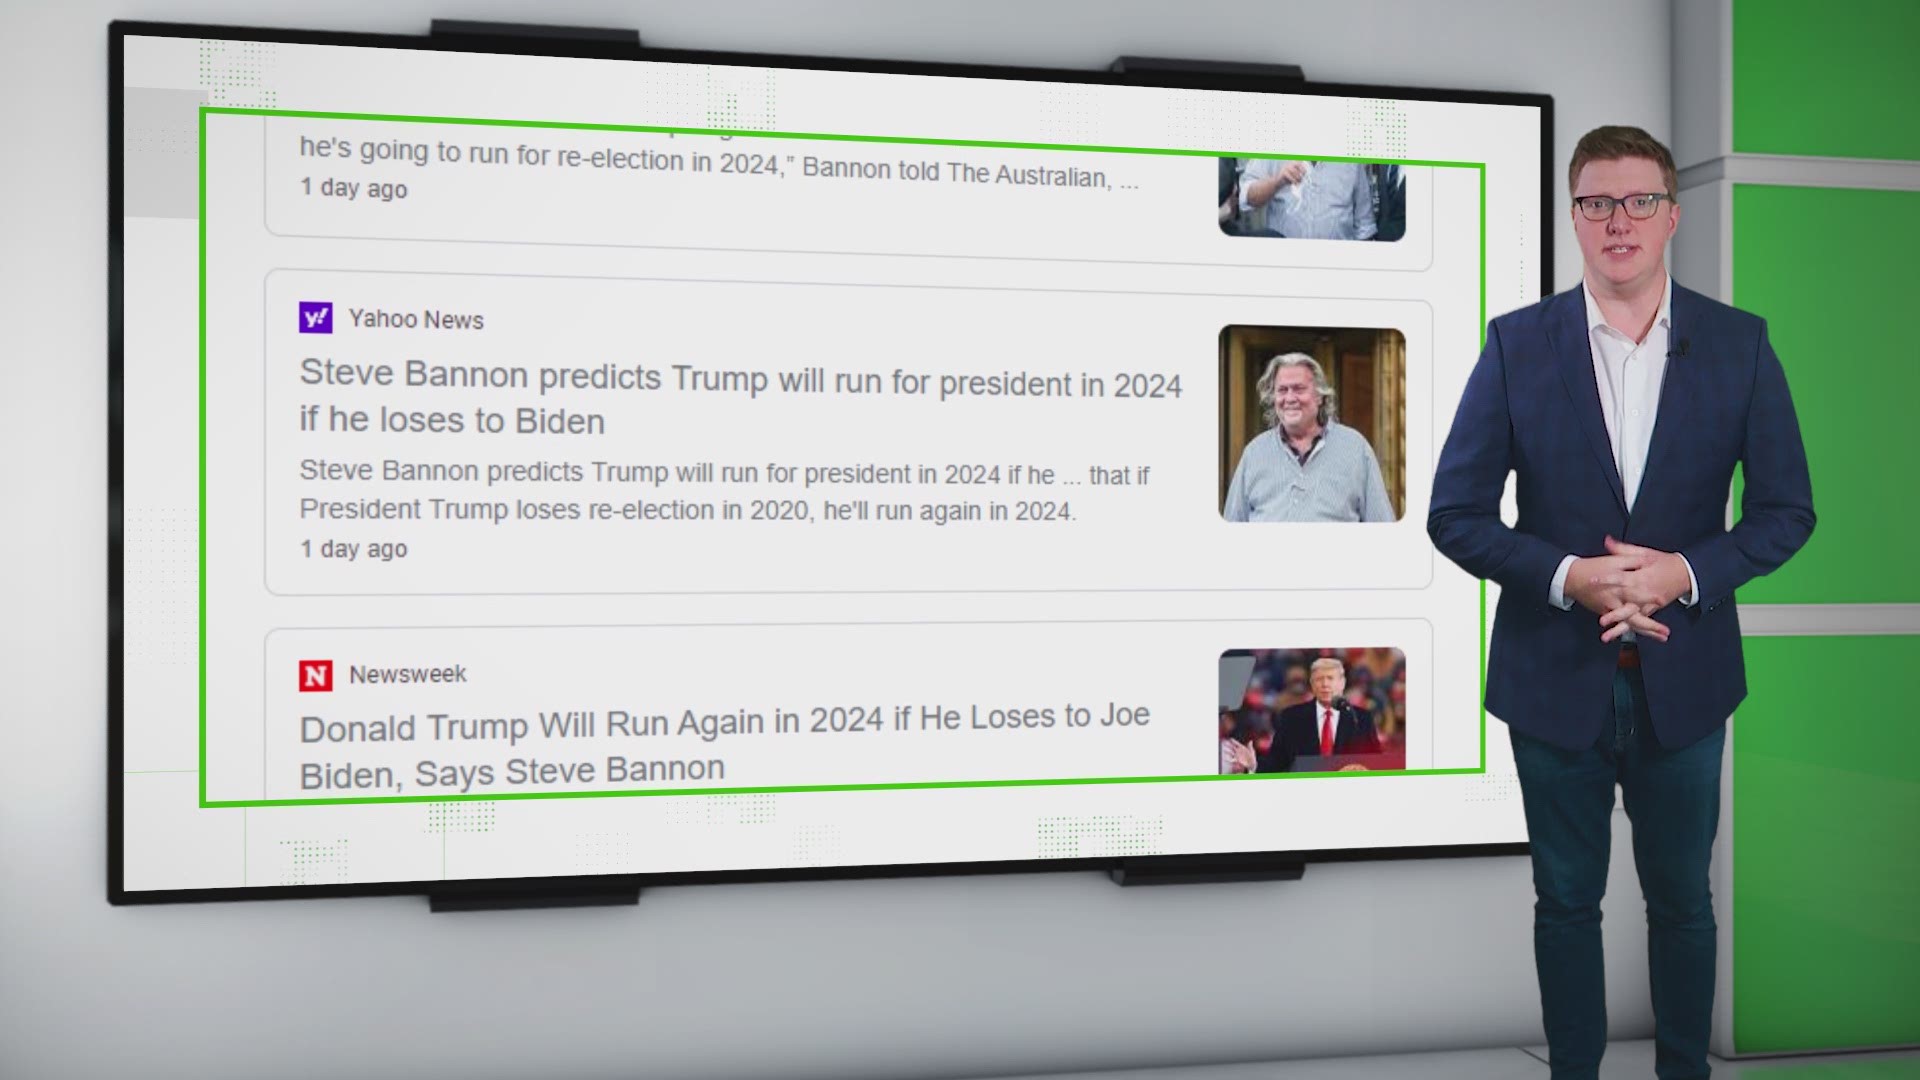 VERIFY: Yes, Trump can run again in 2024 if he loses the 2020 election. | literacybasics.ca